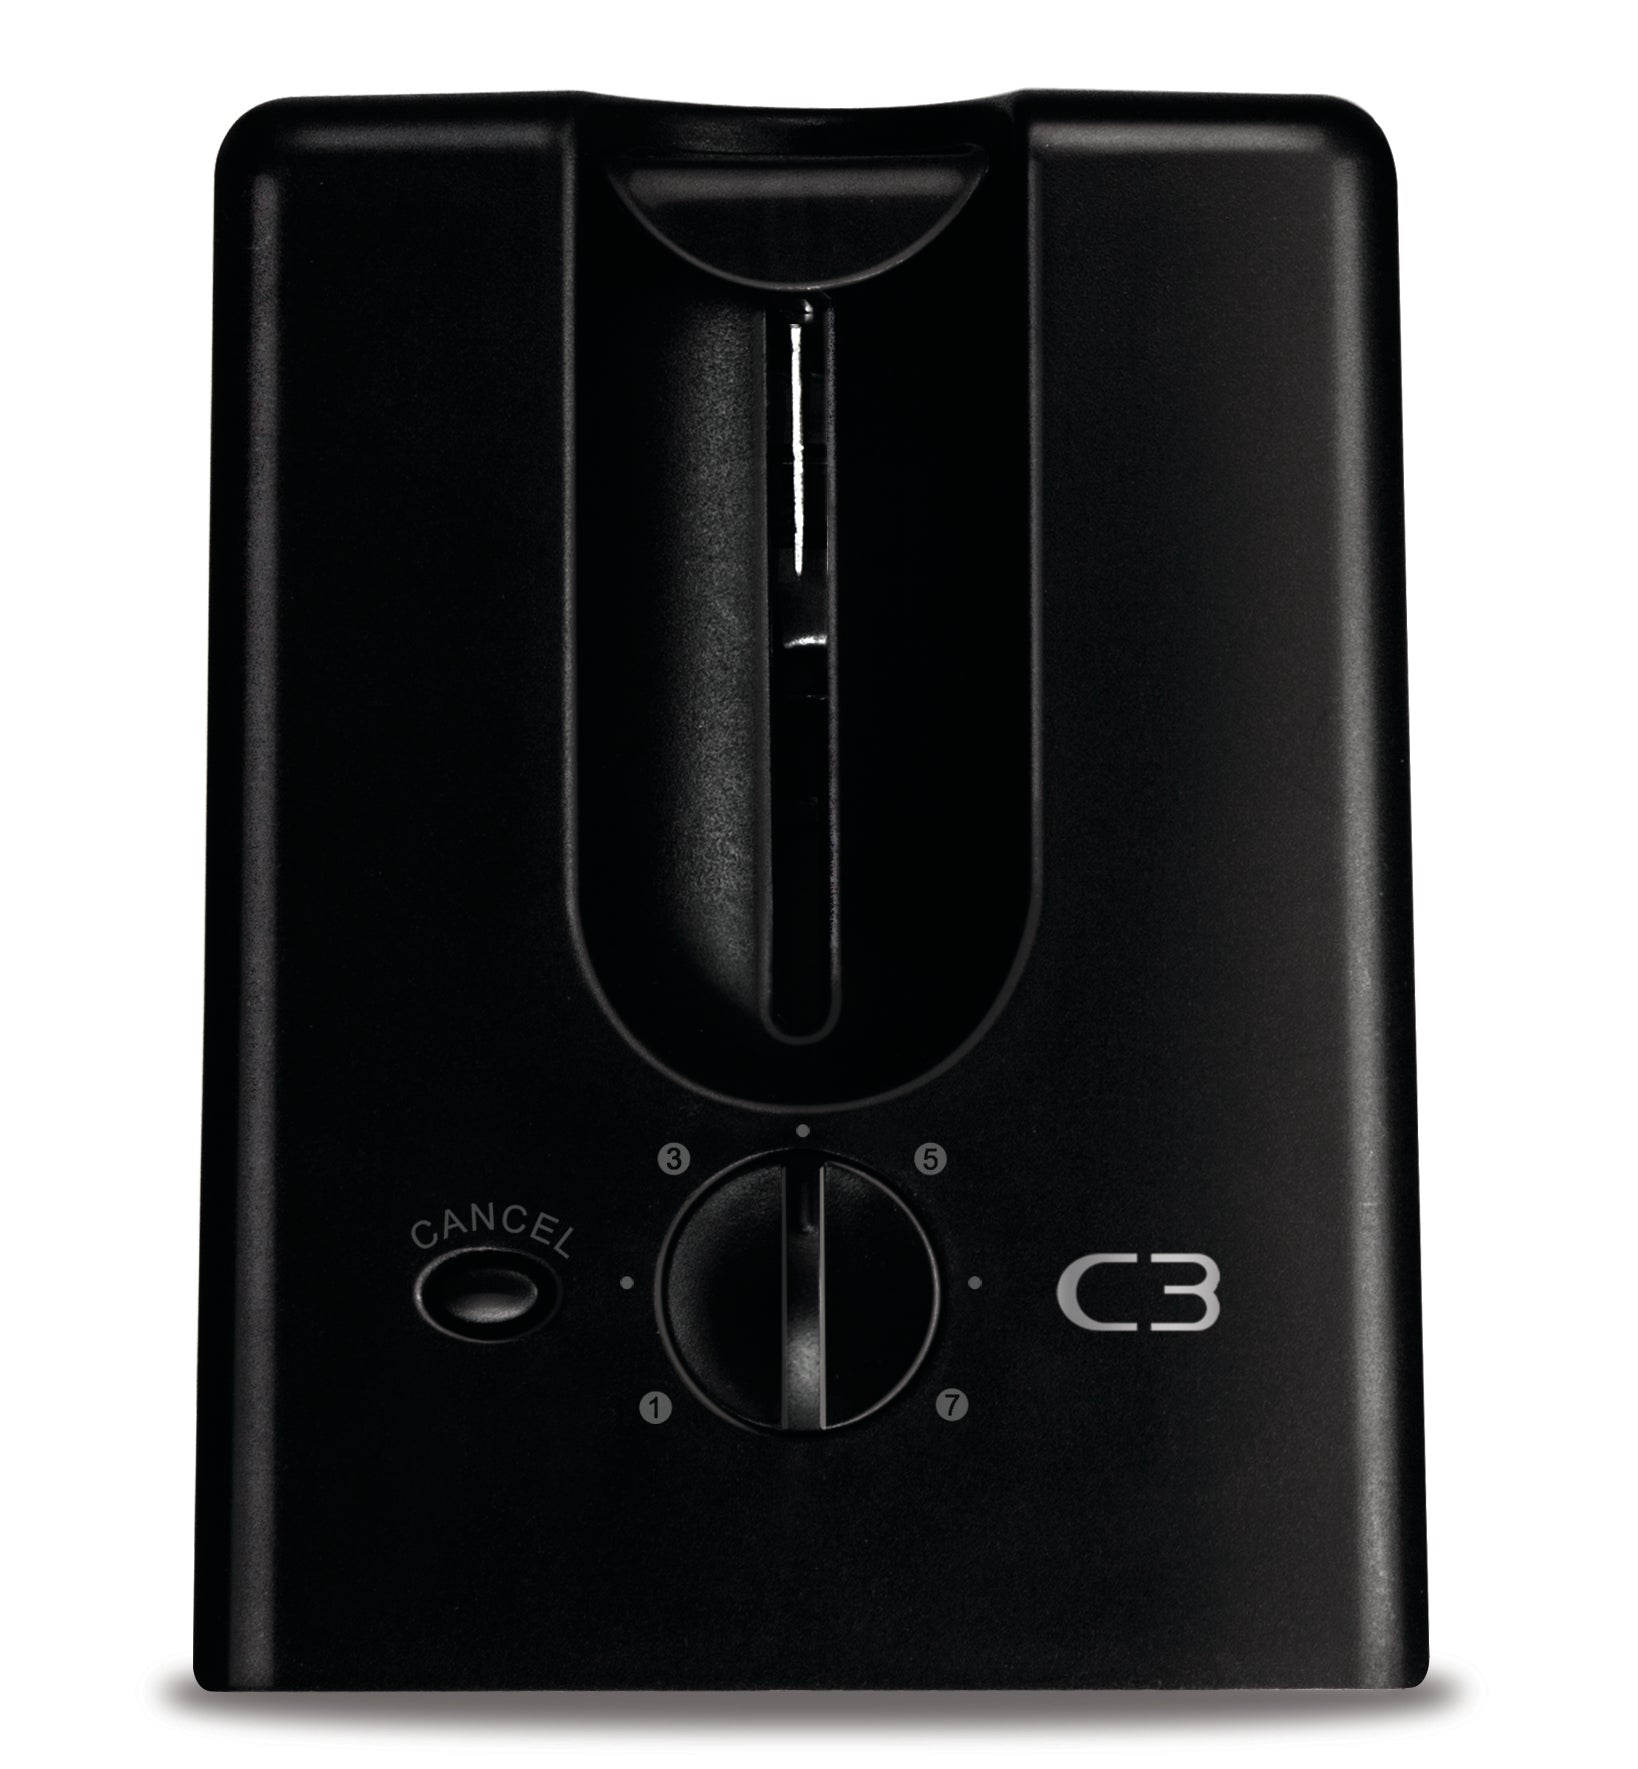 C3 Compact Toaster